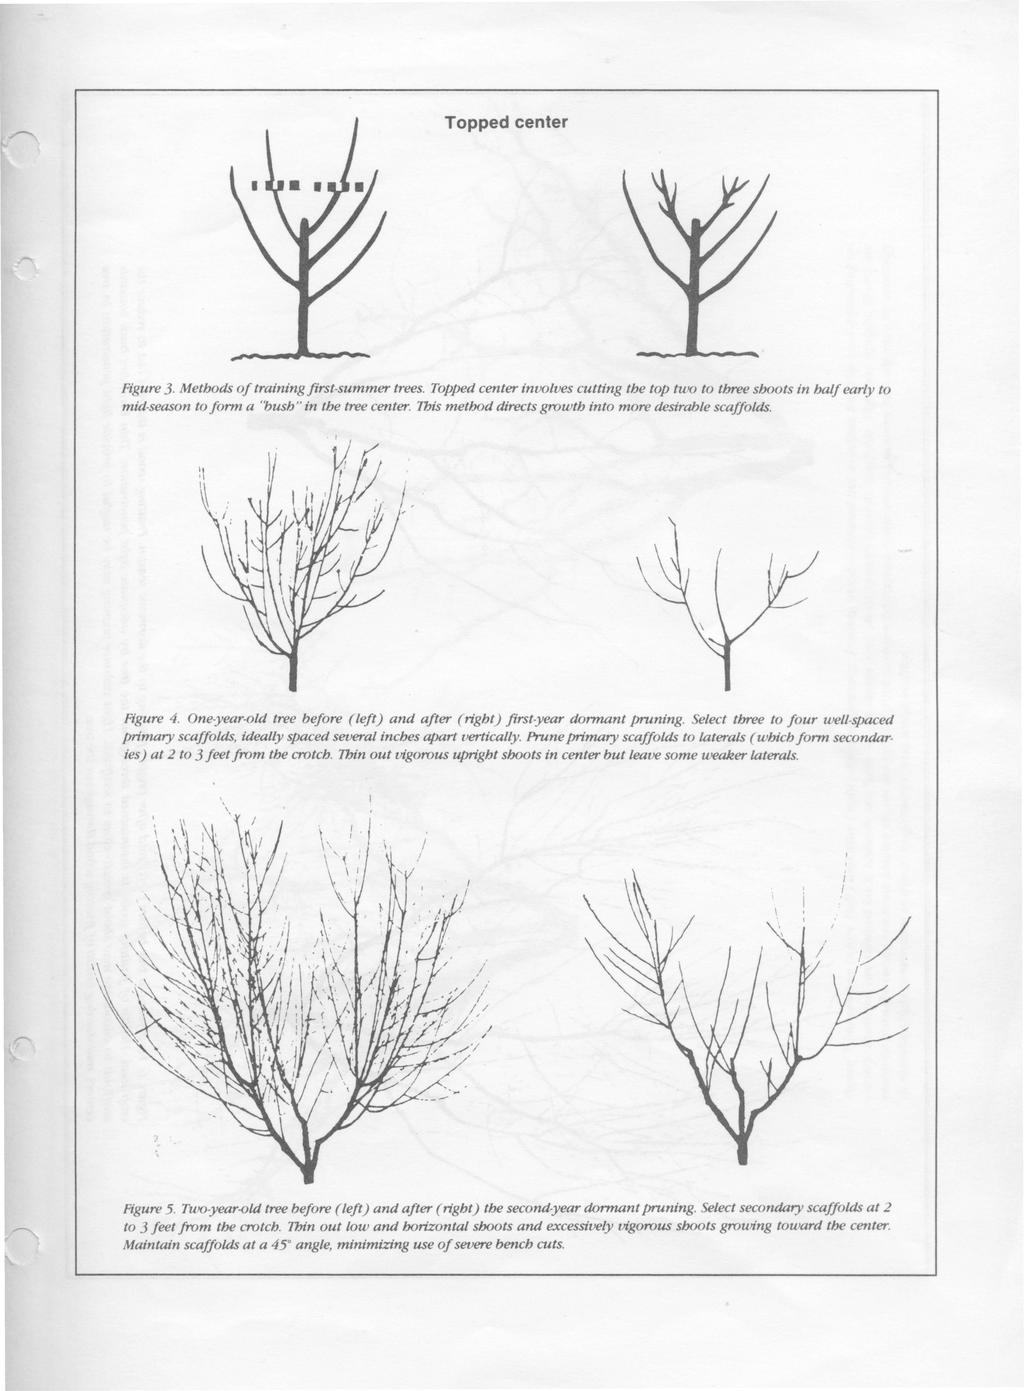 Topped center Figure 3. Methods of training first-summer trees. Topped center involves cutting the top two to three shoots in half early to mid-season to form a "bush" in the tree center.